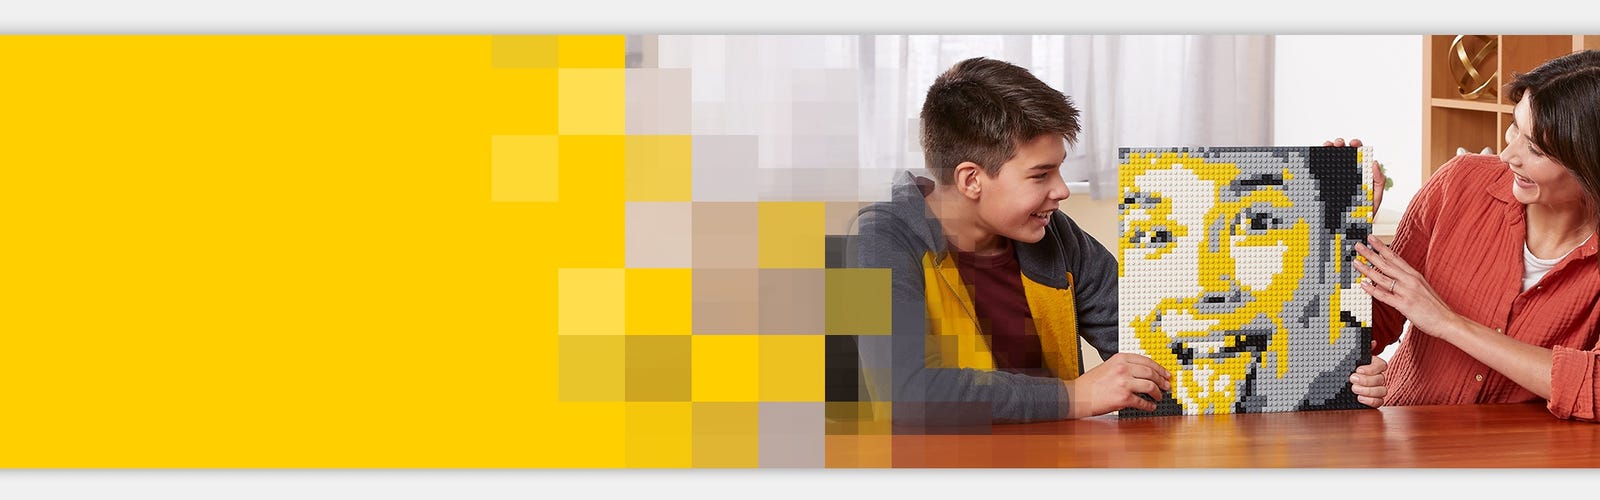 ▻ LEGO 40179 Personalized Mosaic Portrait: Now available through